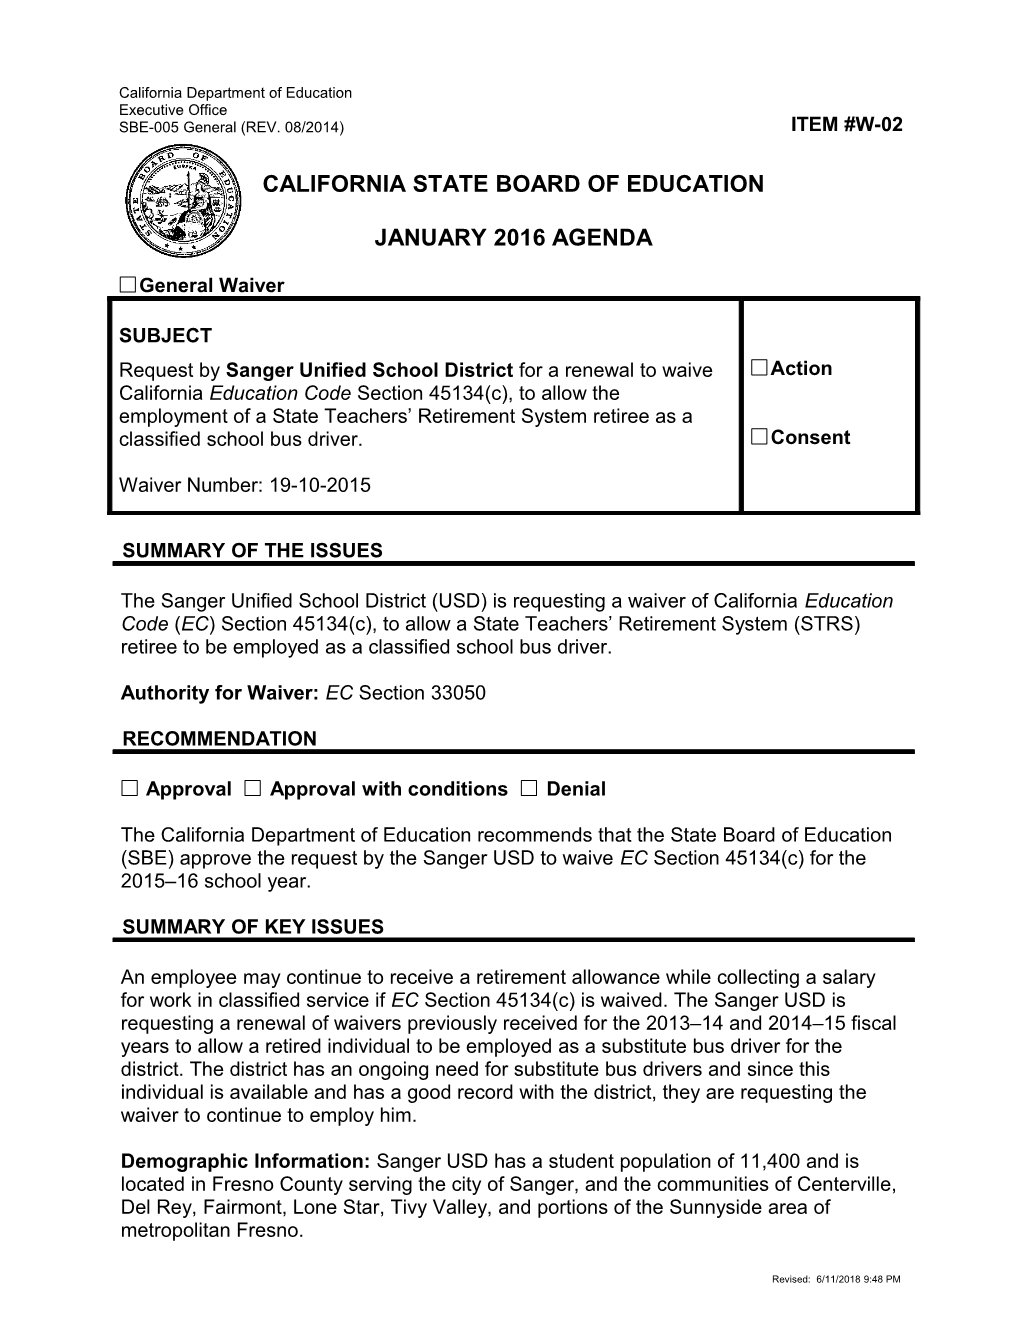 January 2016 Waiver Item W-02 - Meeting Agendas (CA State Board of Education)